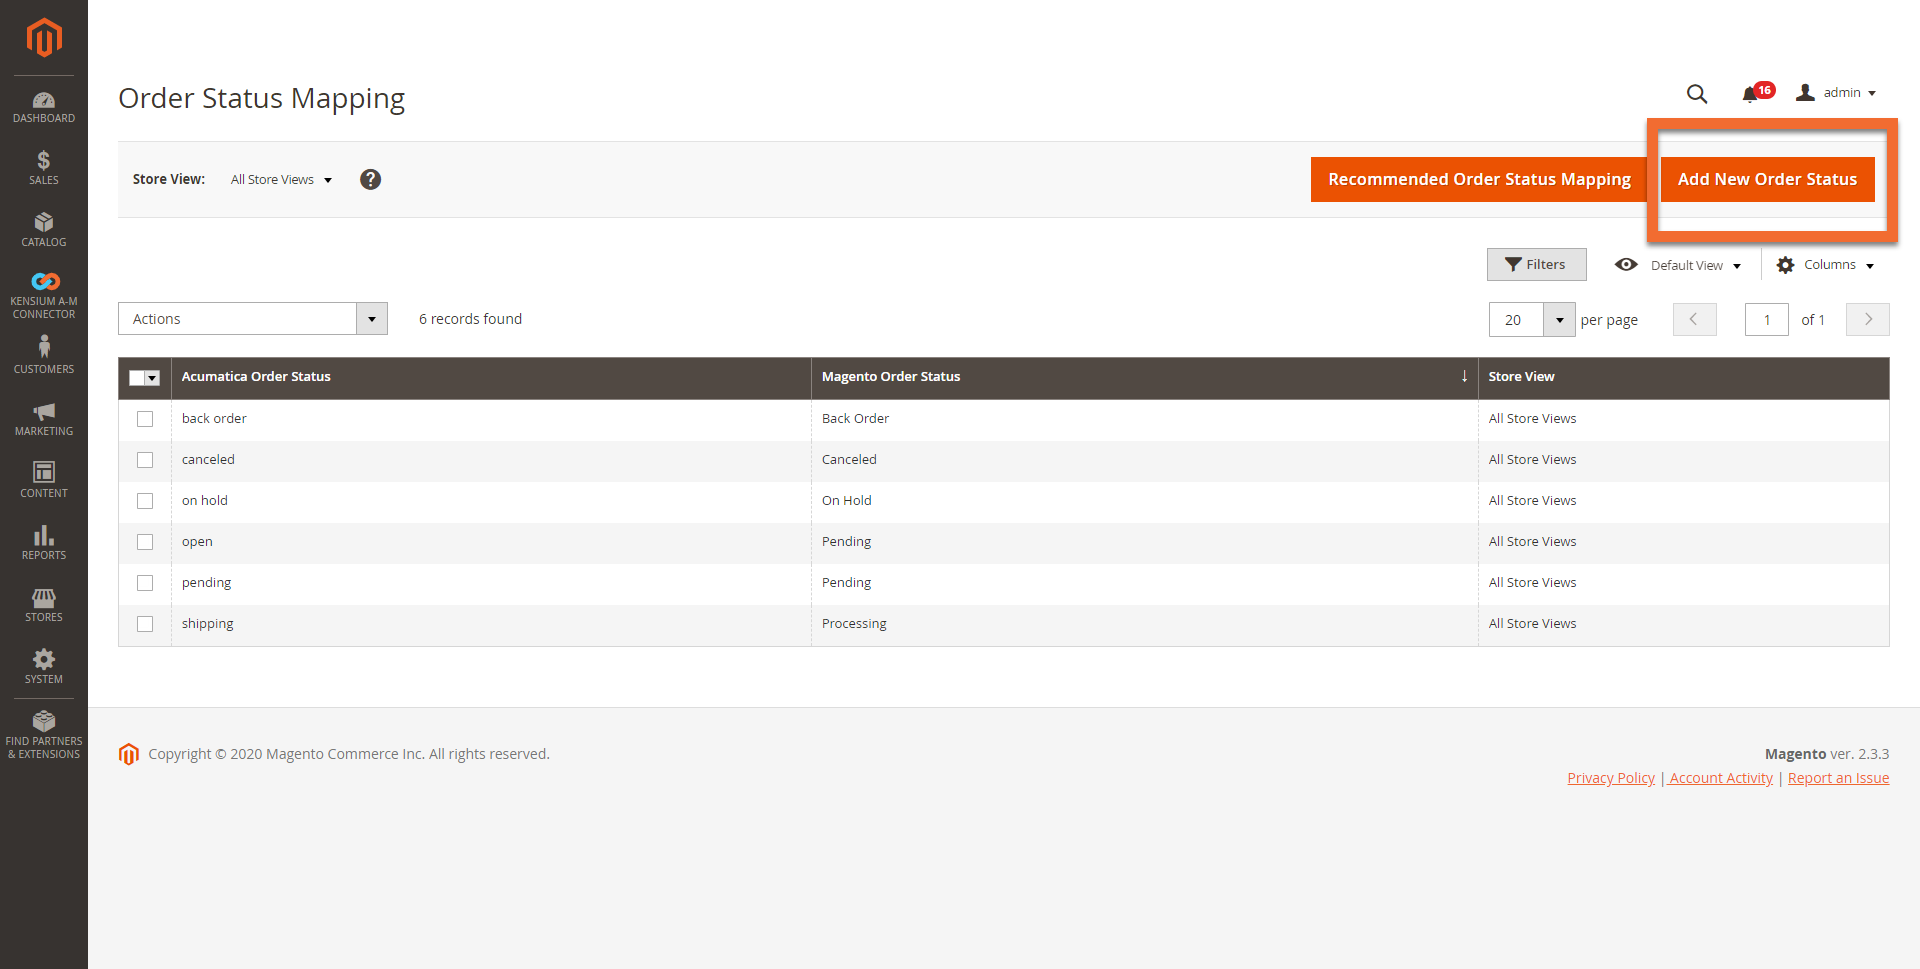 Order Status Mapping Screen in Magento